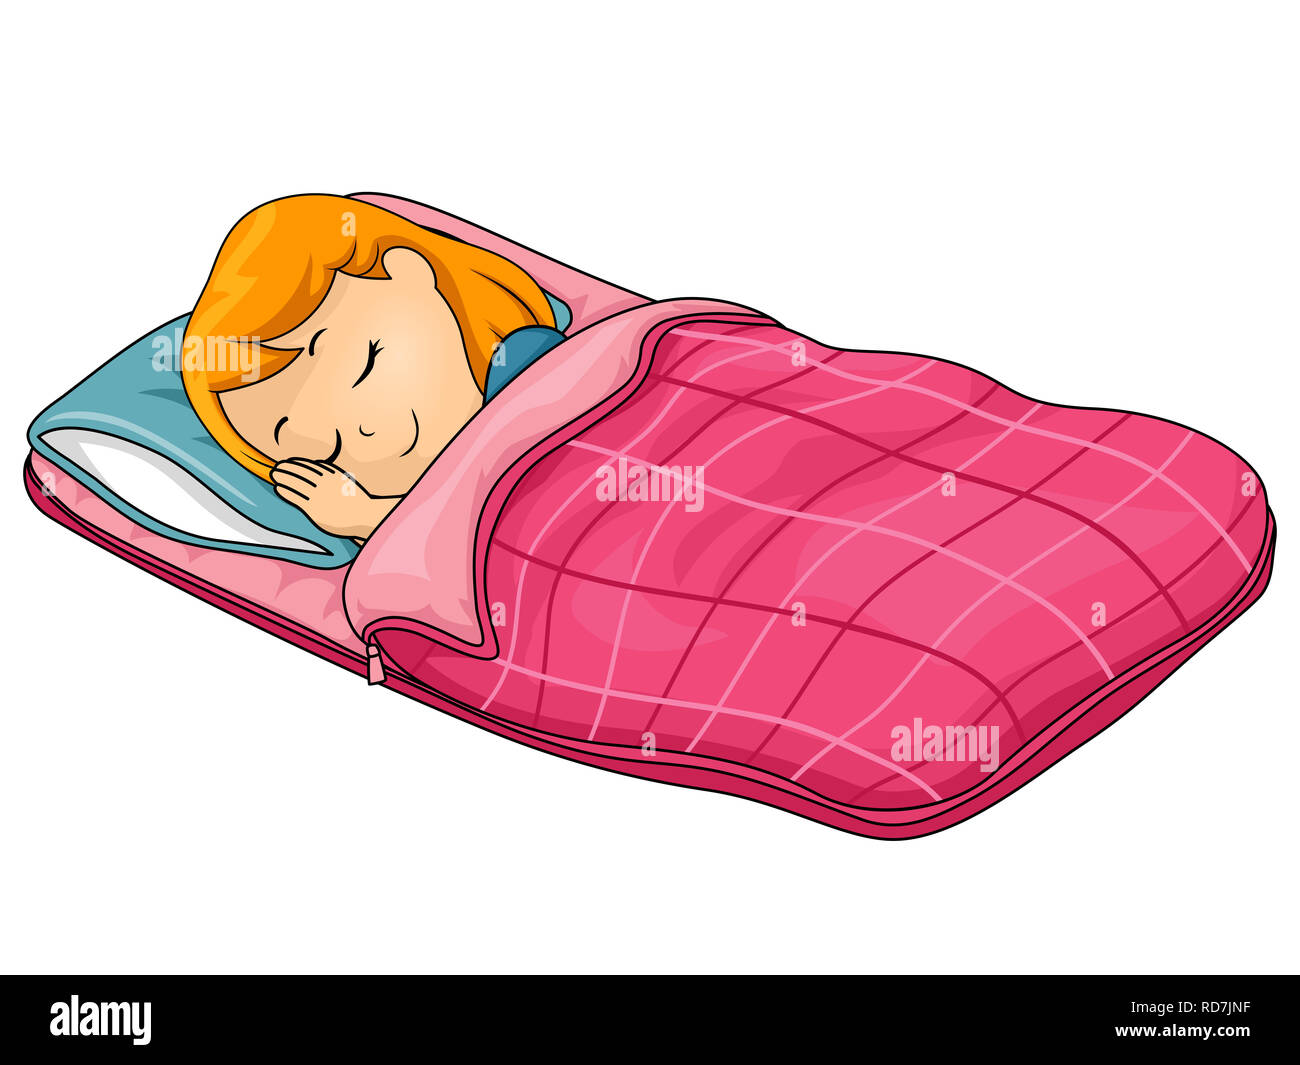 Illustration of a Kid Girl Sleeping in a Sleeping Bag with Pillow Stock  Photo - Alamy